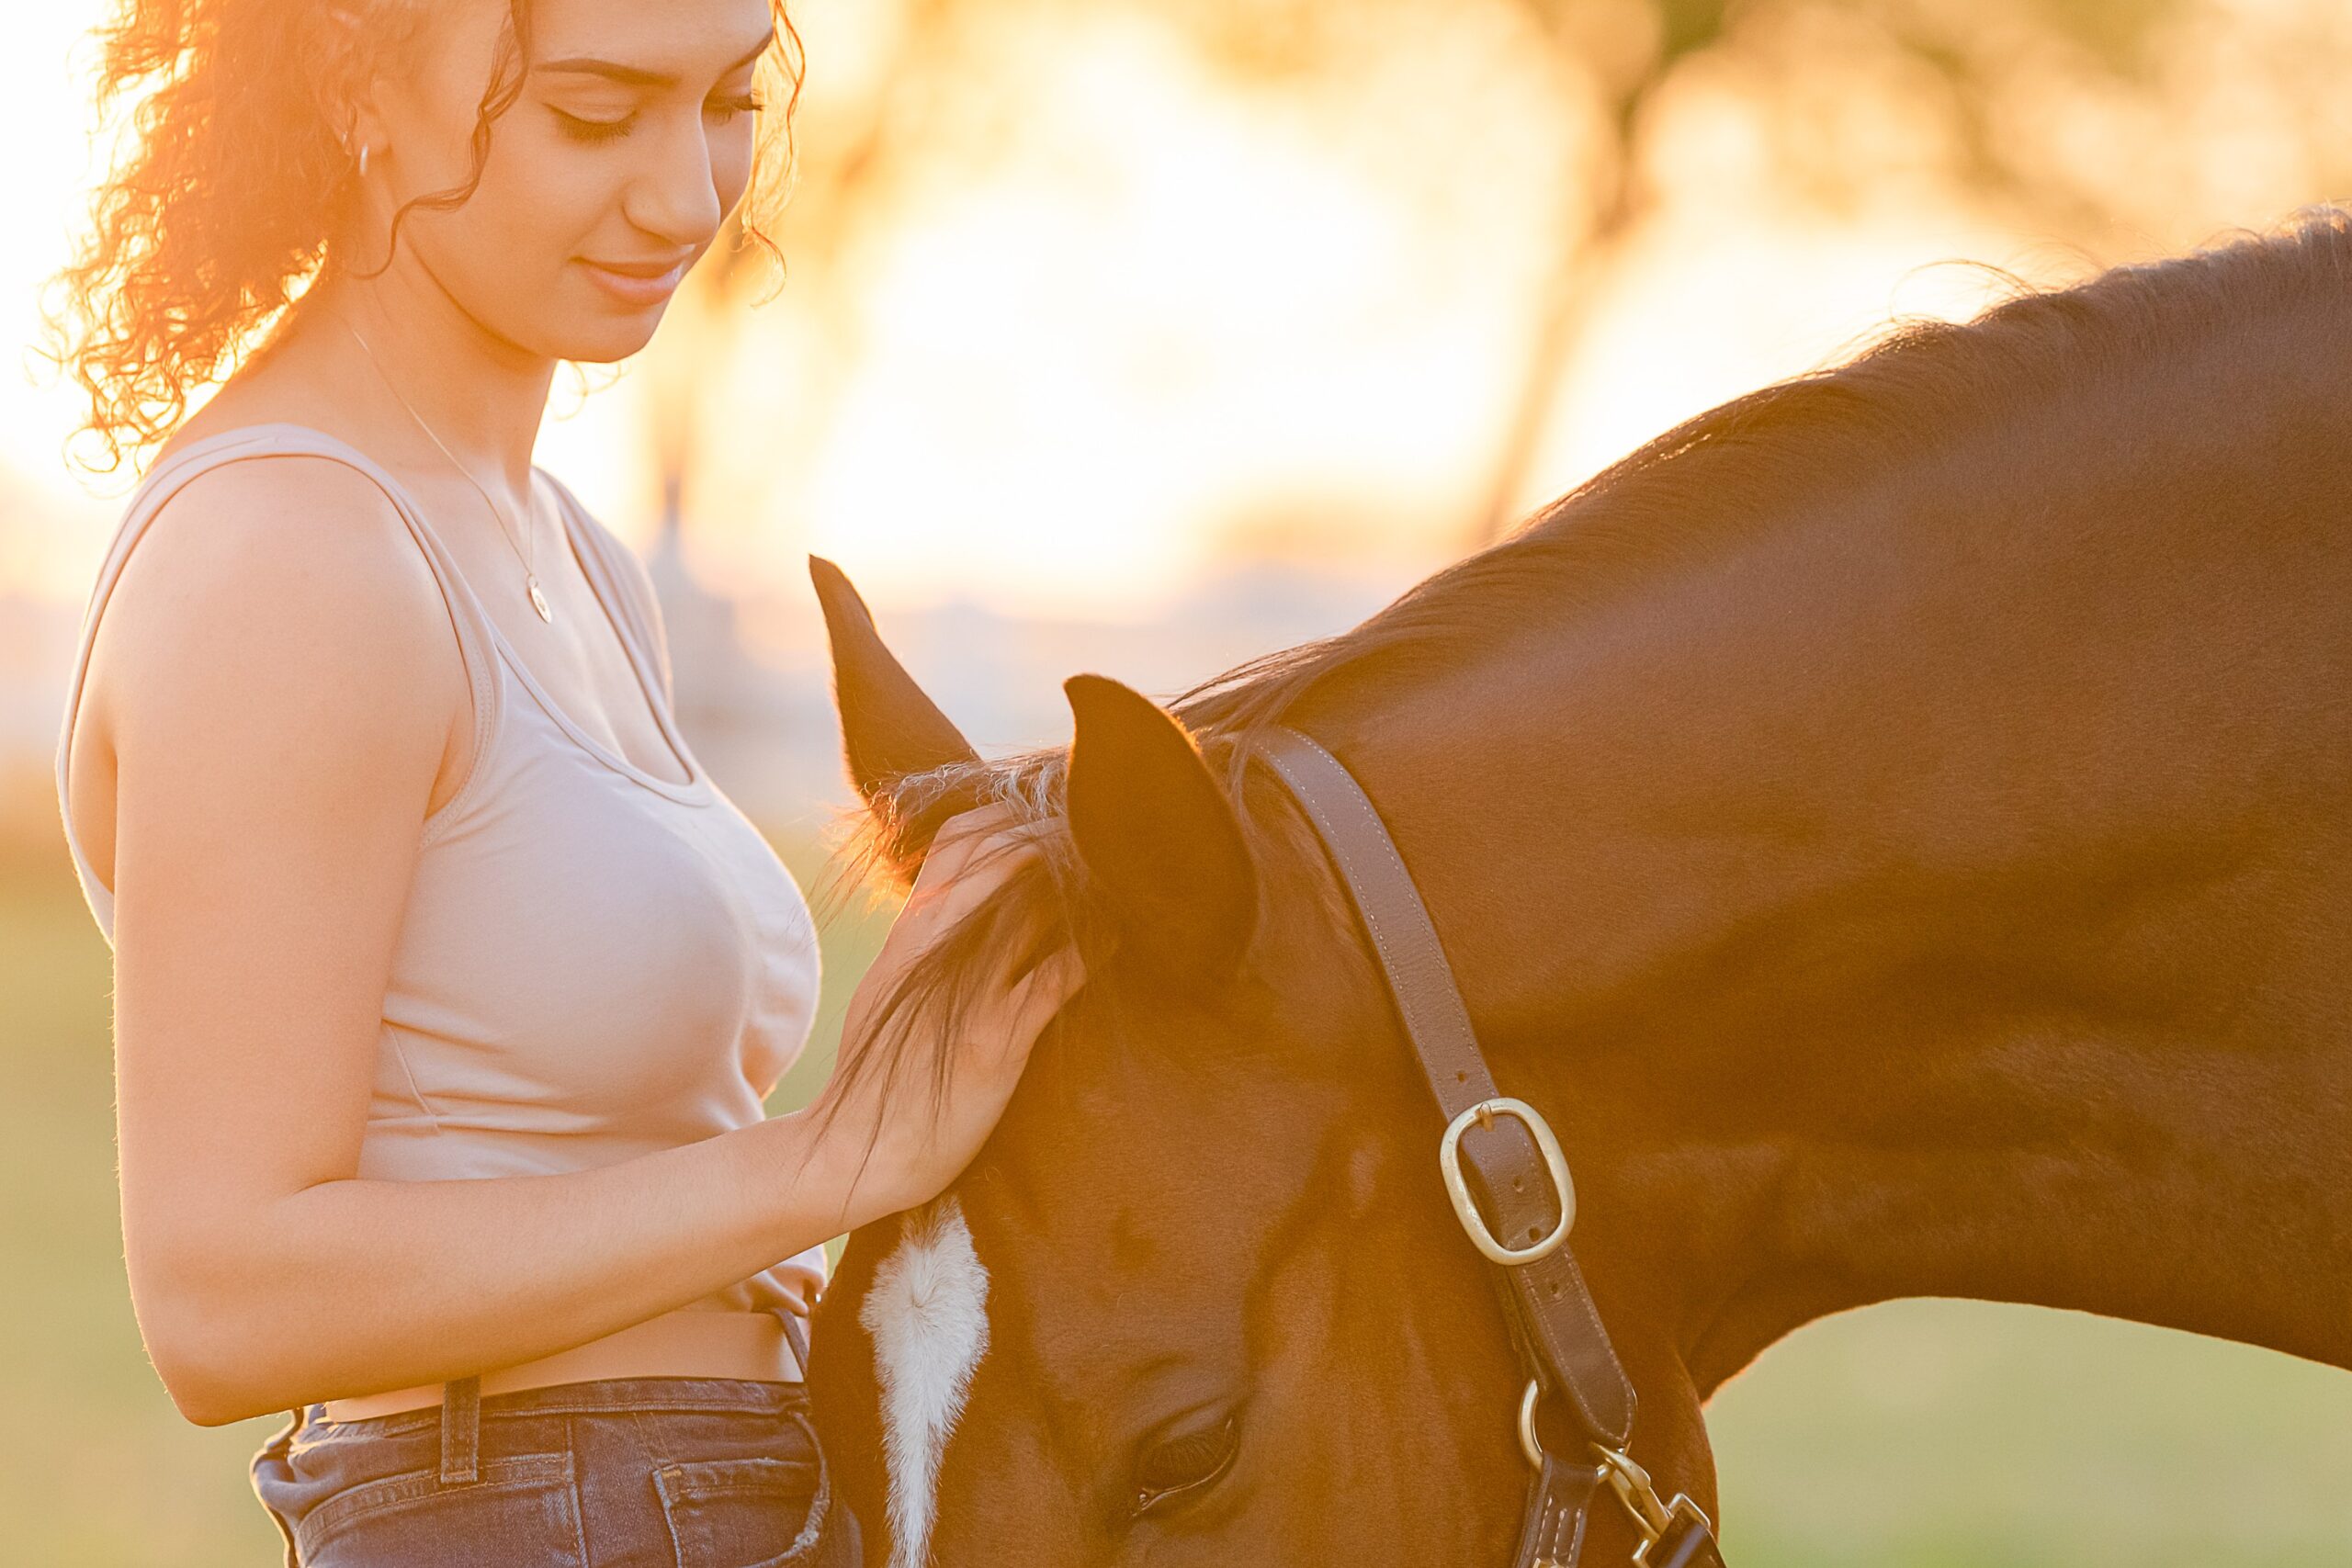 A 20-something woman with curly hair looks down at her horse's lowered head and pets his forelock